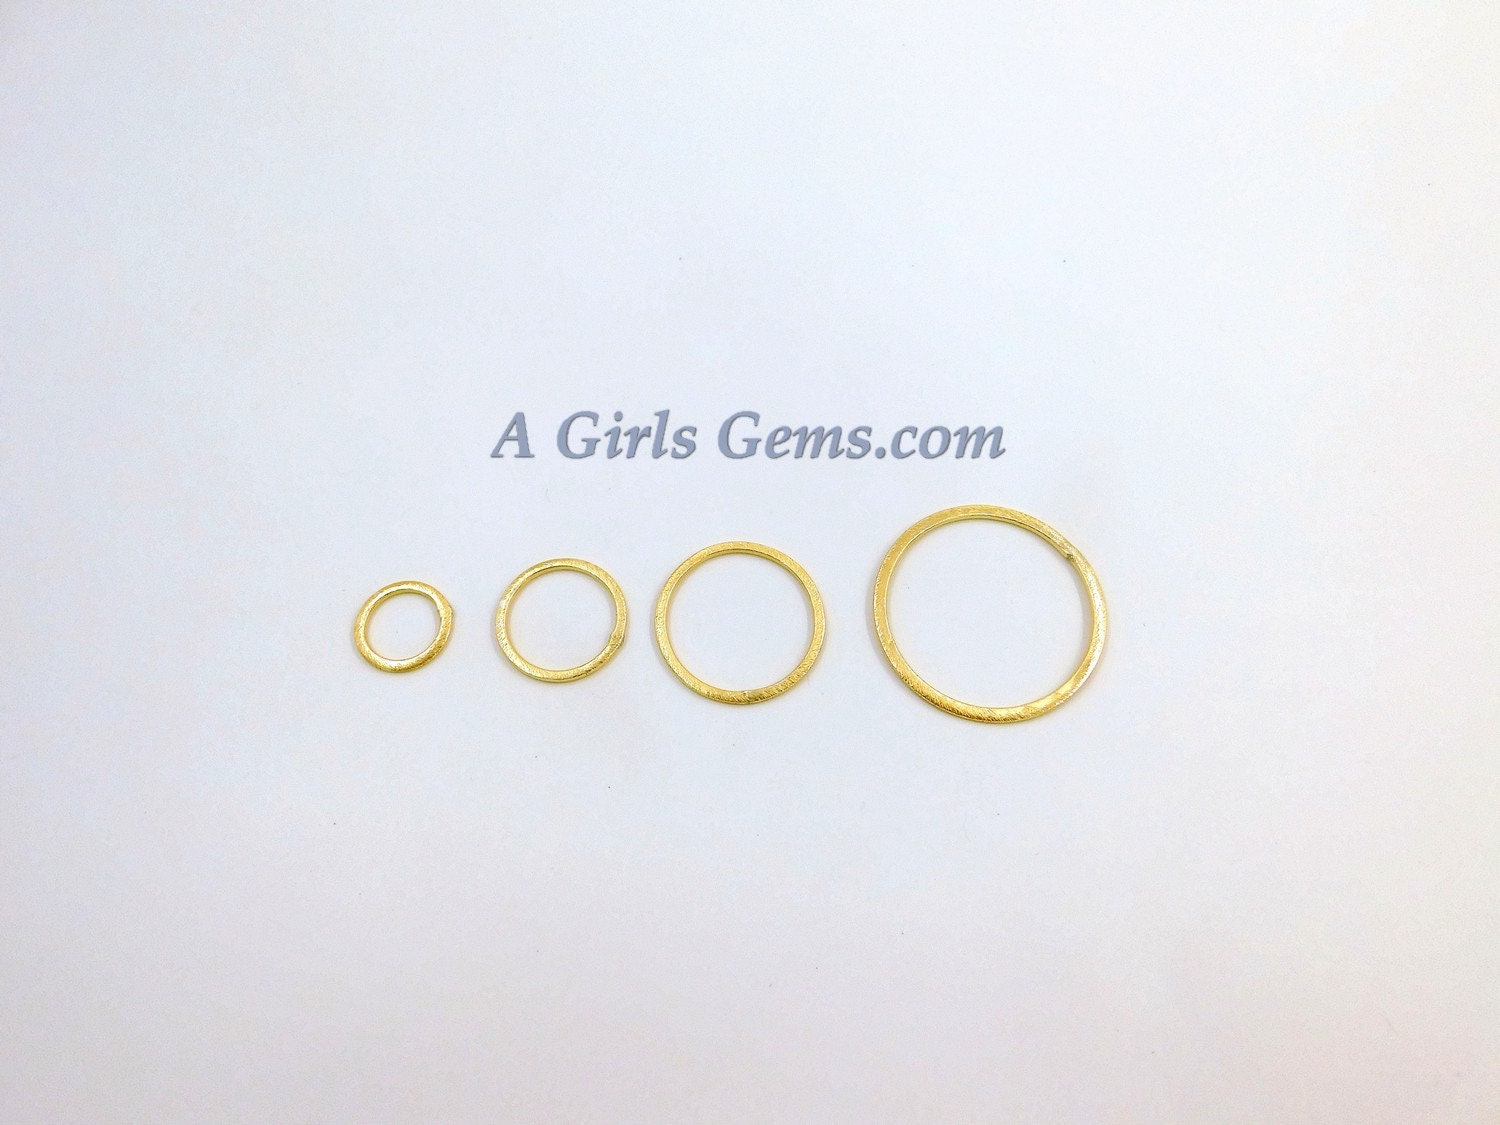 Brushed Gold Washer Charms, Gold Round O Connector Ring Hoop Charms #790, Sizes 15 - 60 mm